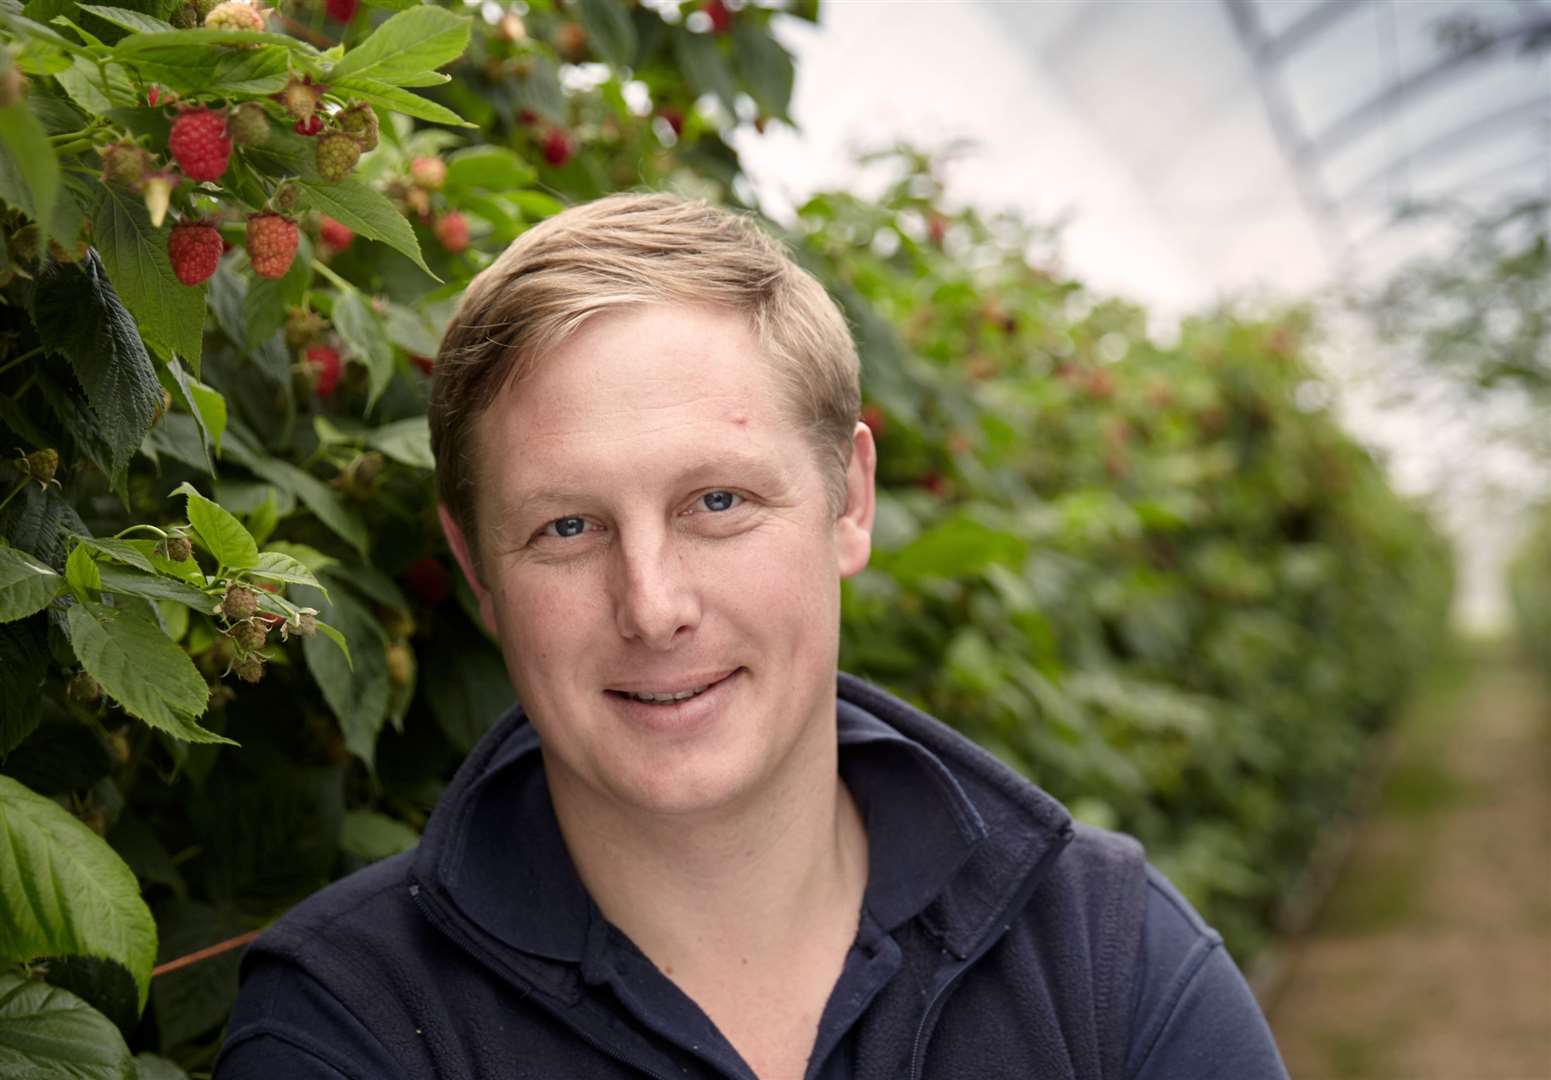 Oli Pascall is heading up an innovative sustainable farming project at Clock House Farm